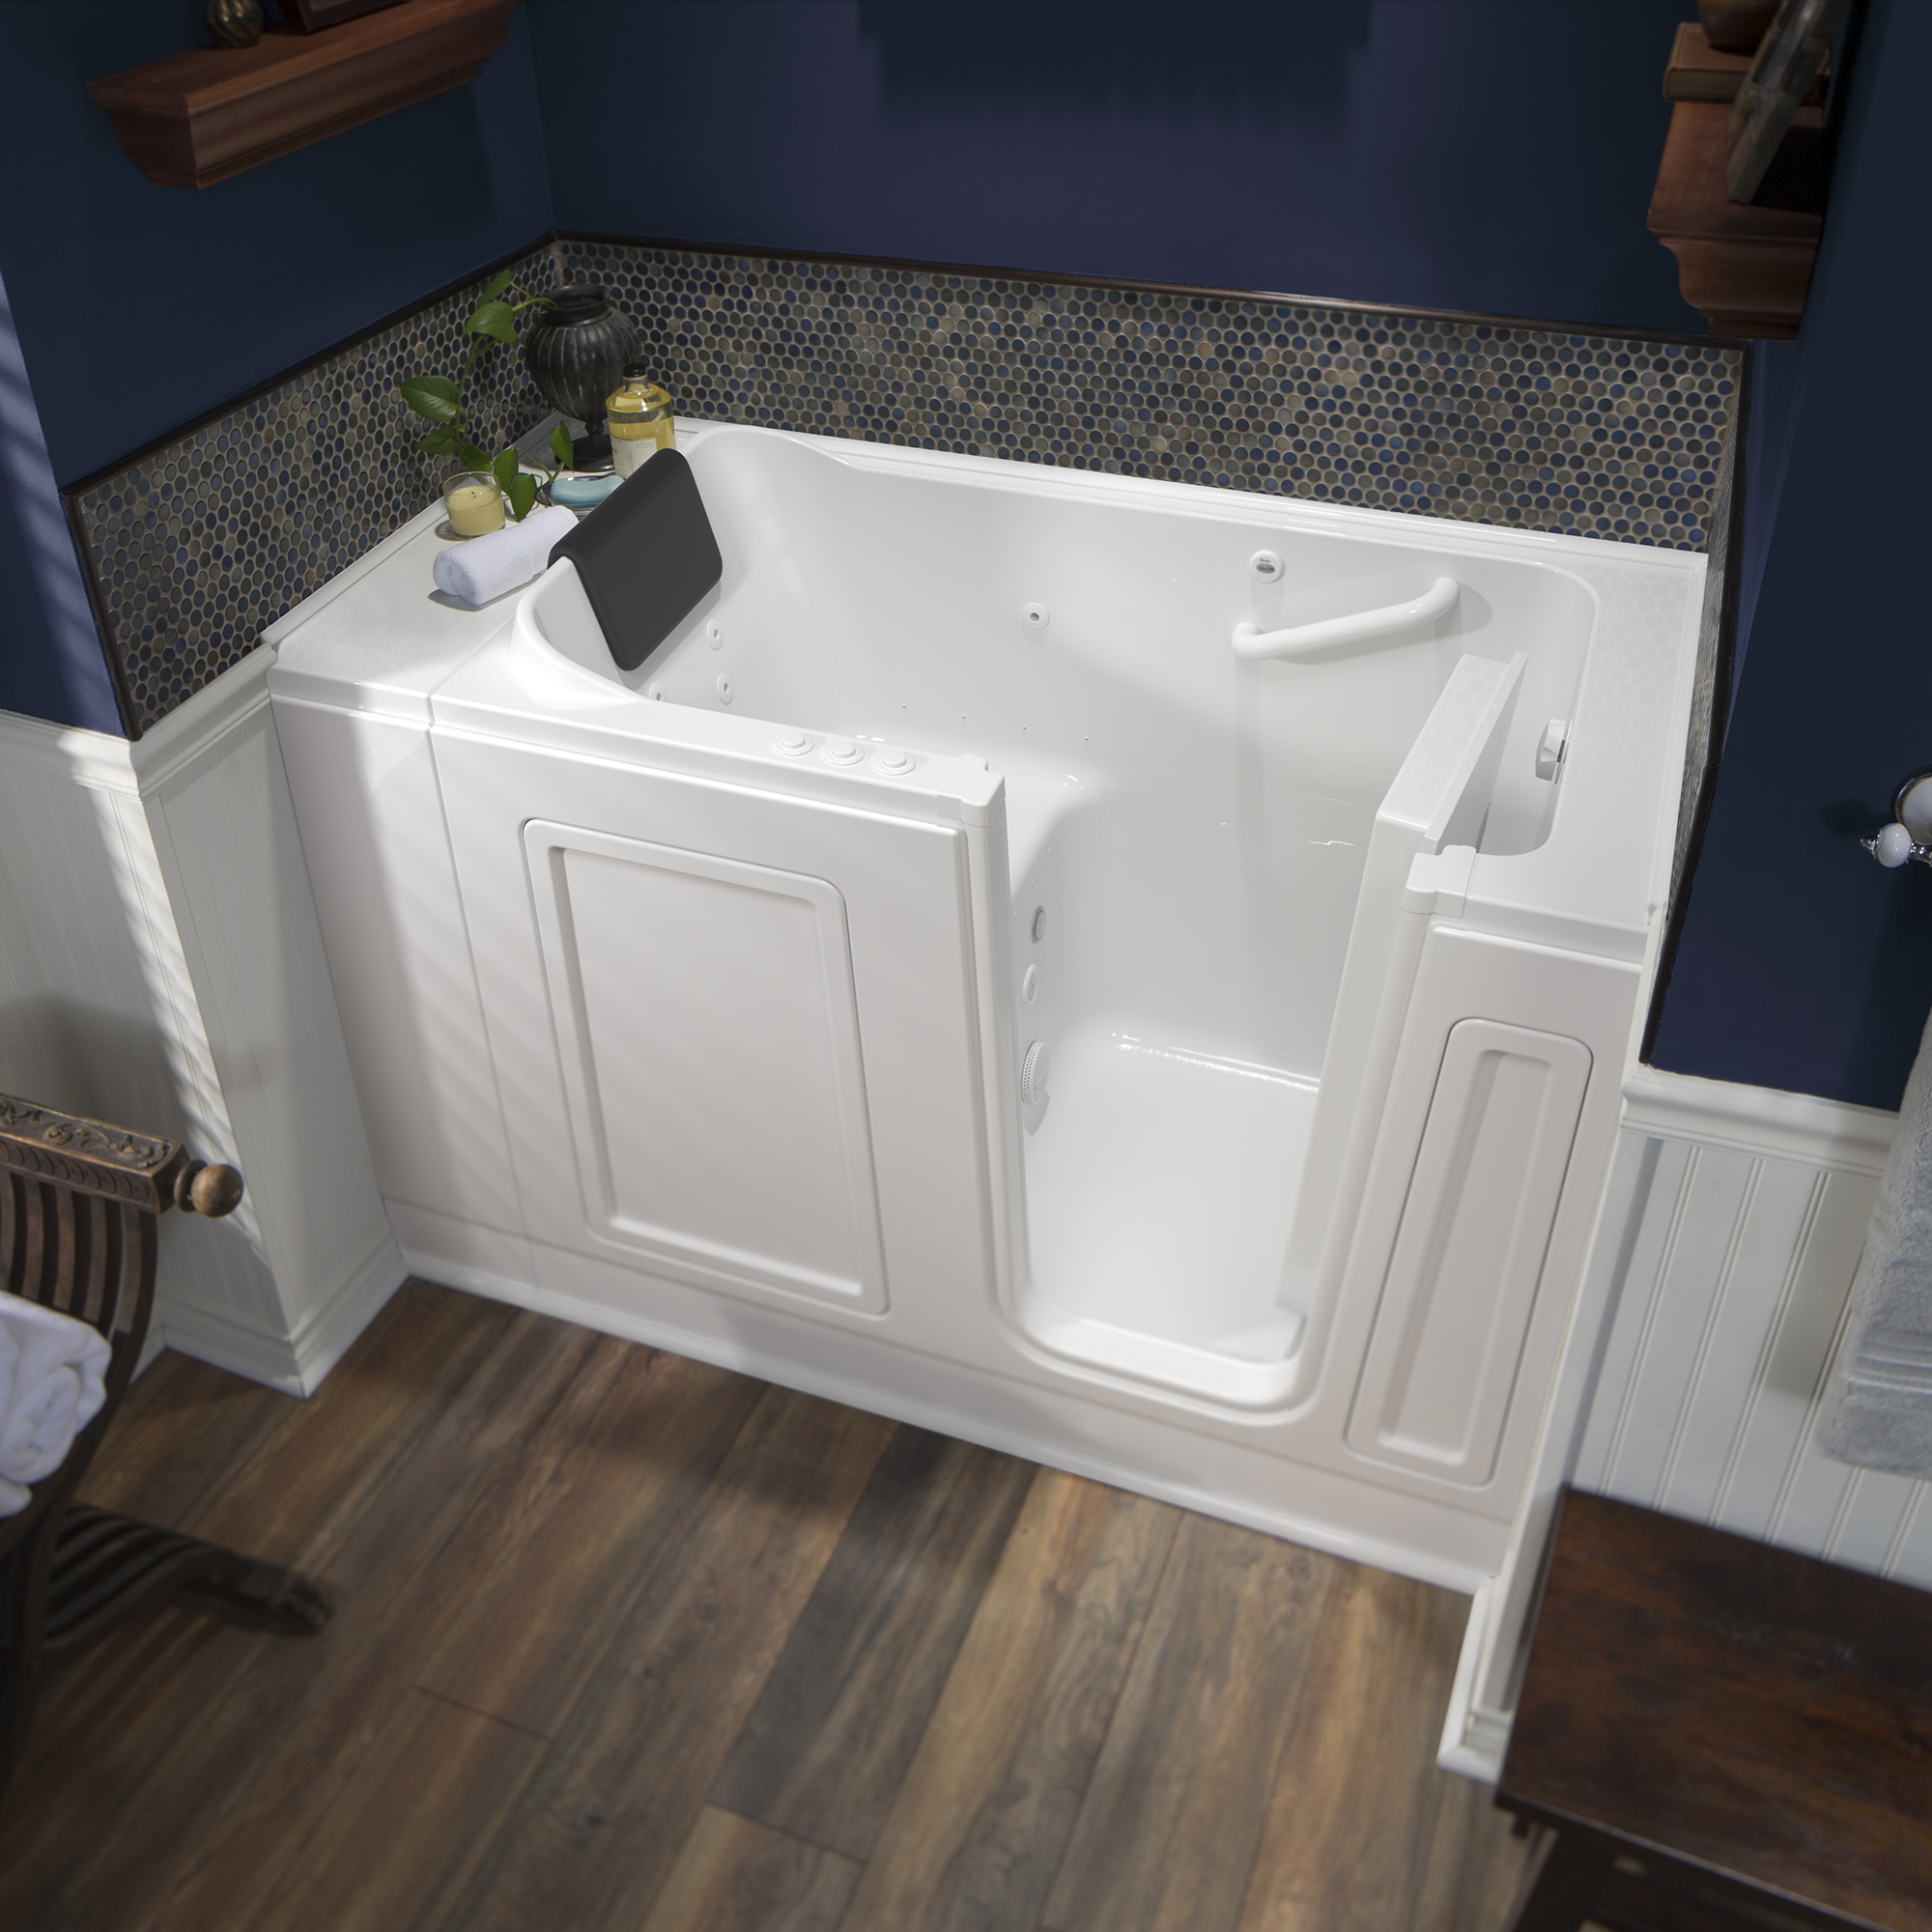 Acrylic Luxury Series 30 x 51 -Inch Walk-in Tub With Combination Air Spa and Whirlpool Systems - Right-Hand Drain